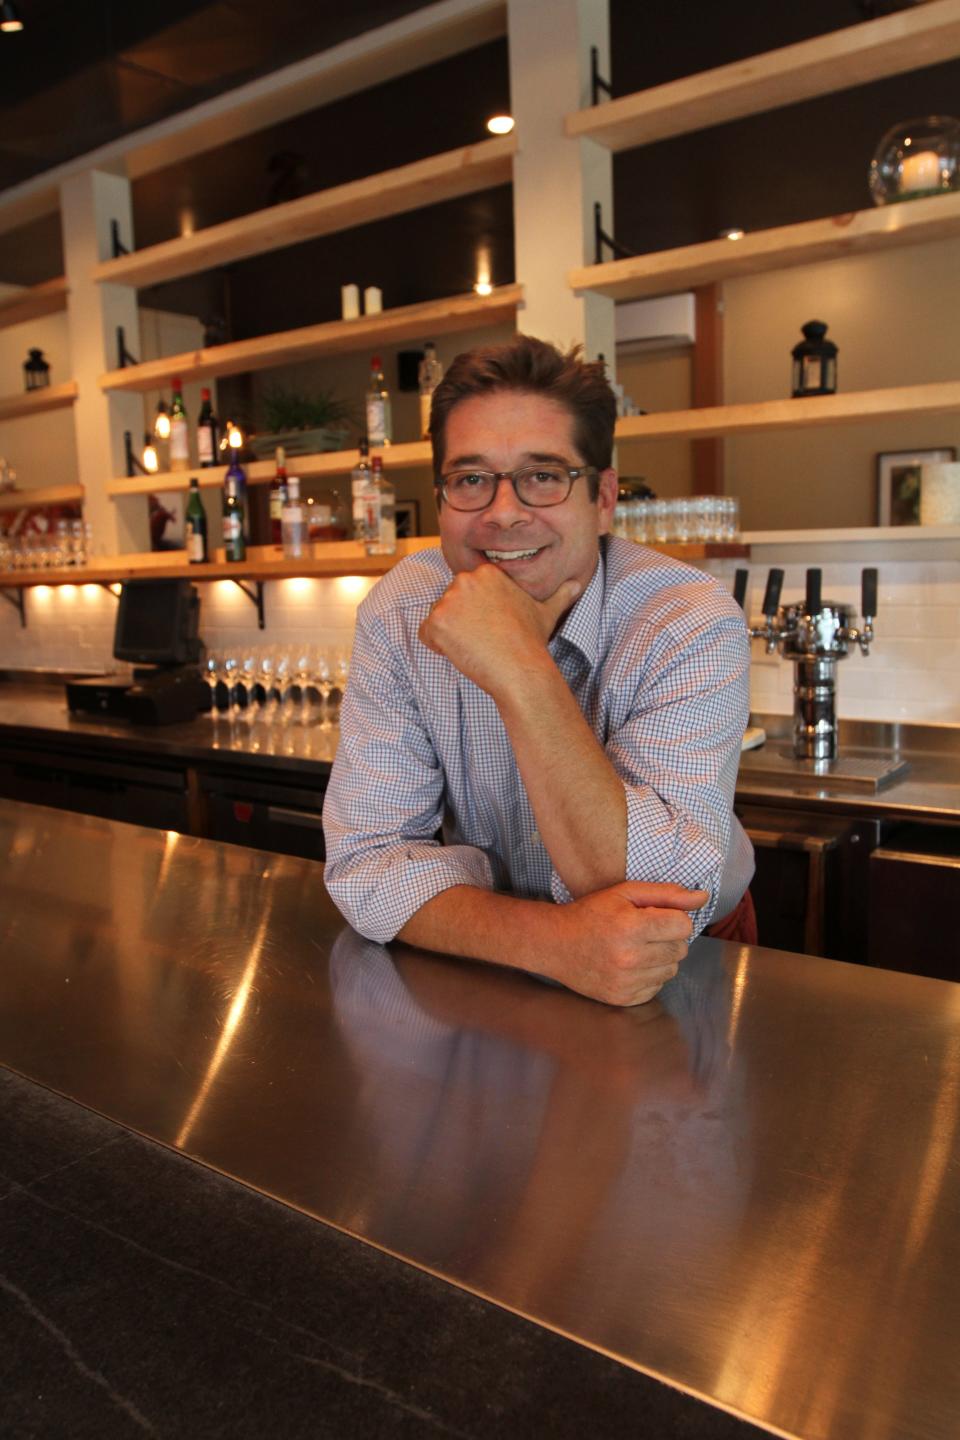 Ben Lloyd is not ready to commit to another 10-year lease and will close his Salted Slate restaurant in Wayland Square after a decade.